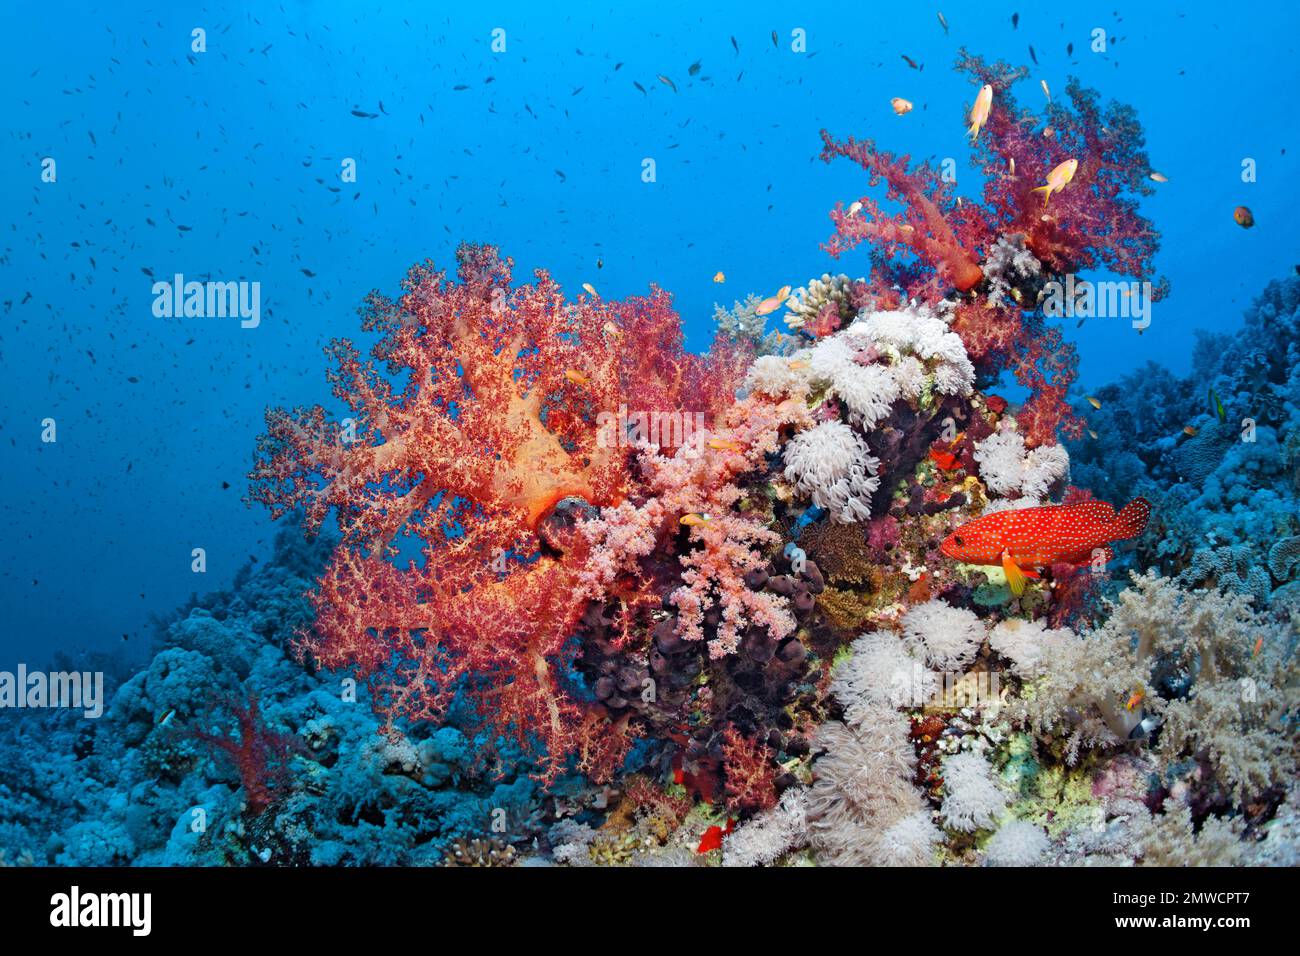 Coral reef with Klunzinger klunzinger's soft coral (Dendronephthya klunzingeri) red, and Xenia corals (Xenia macrospiculata), vermillion seabass Stock Photo